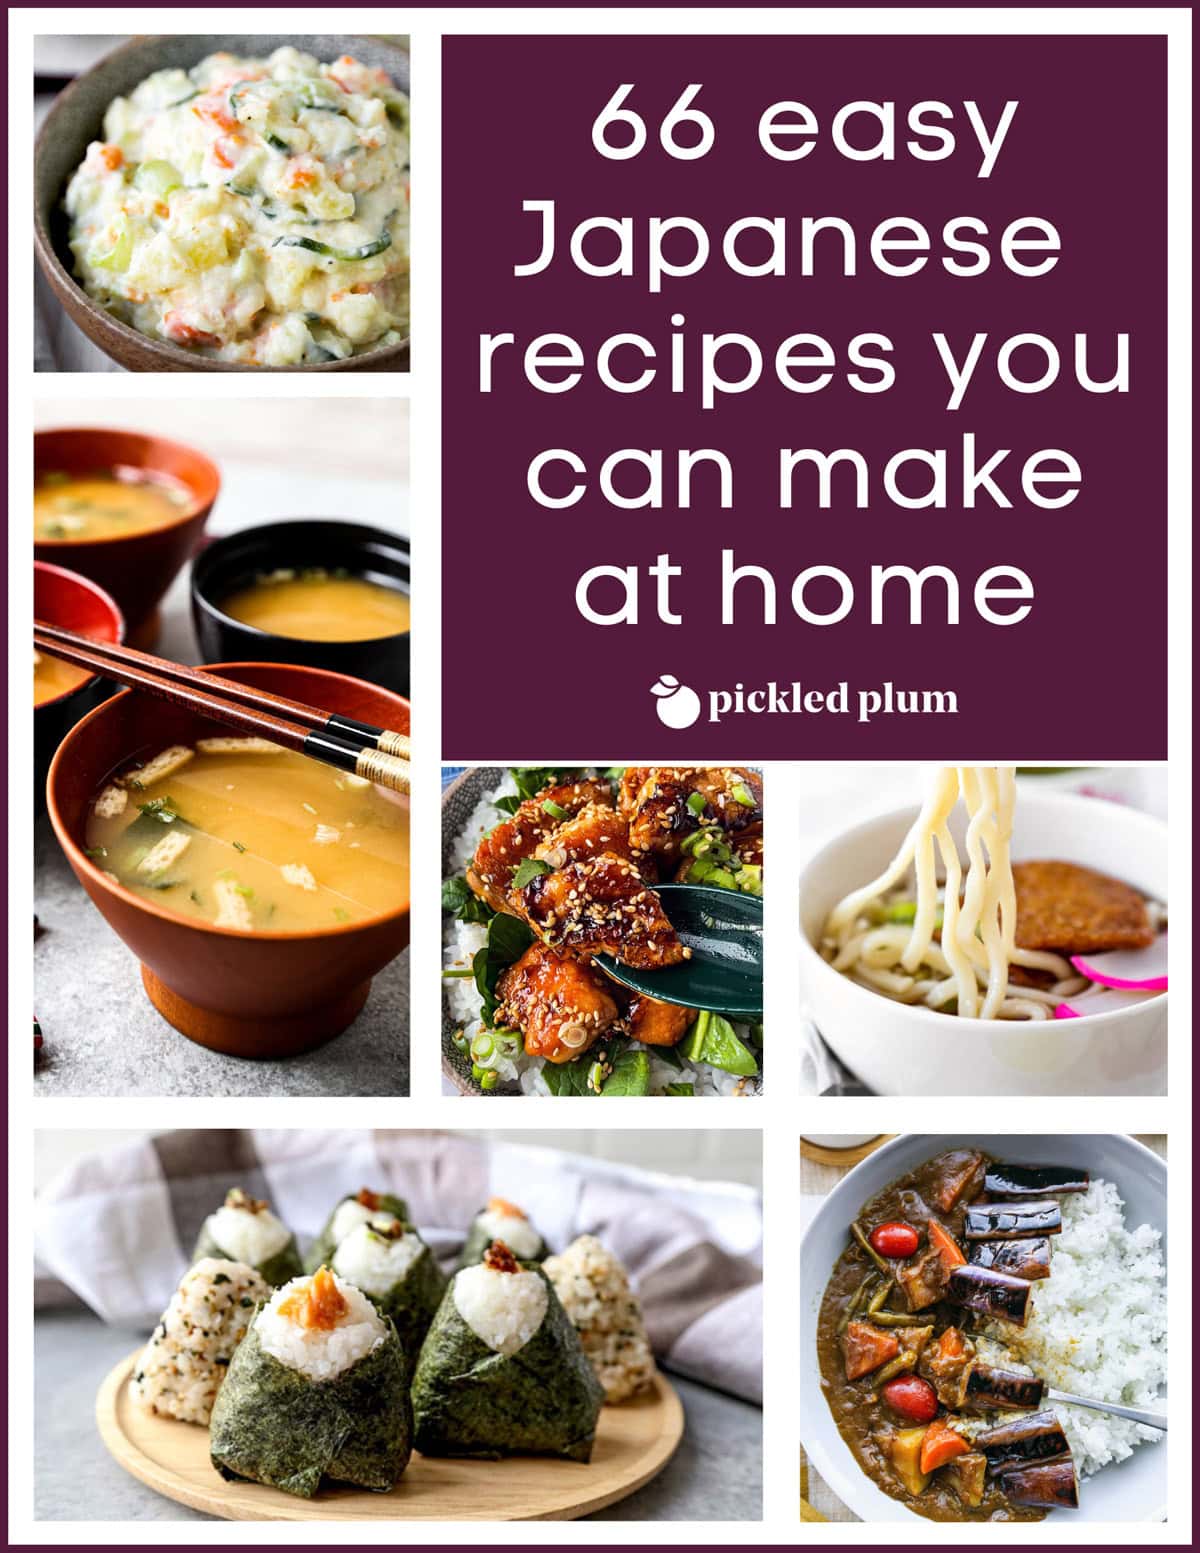 Super Yummy! 12 Most Popular Japanese Snacks You Must Try